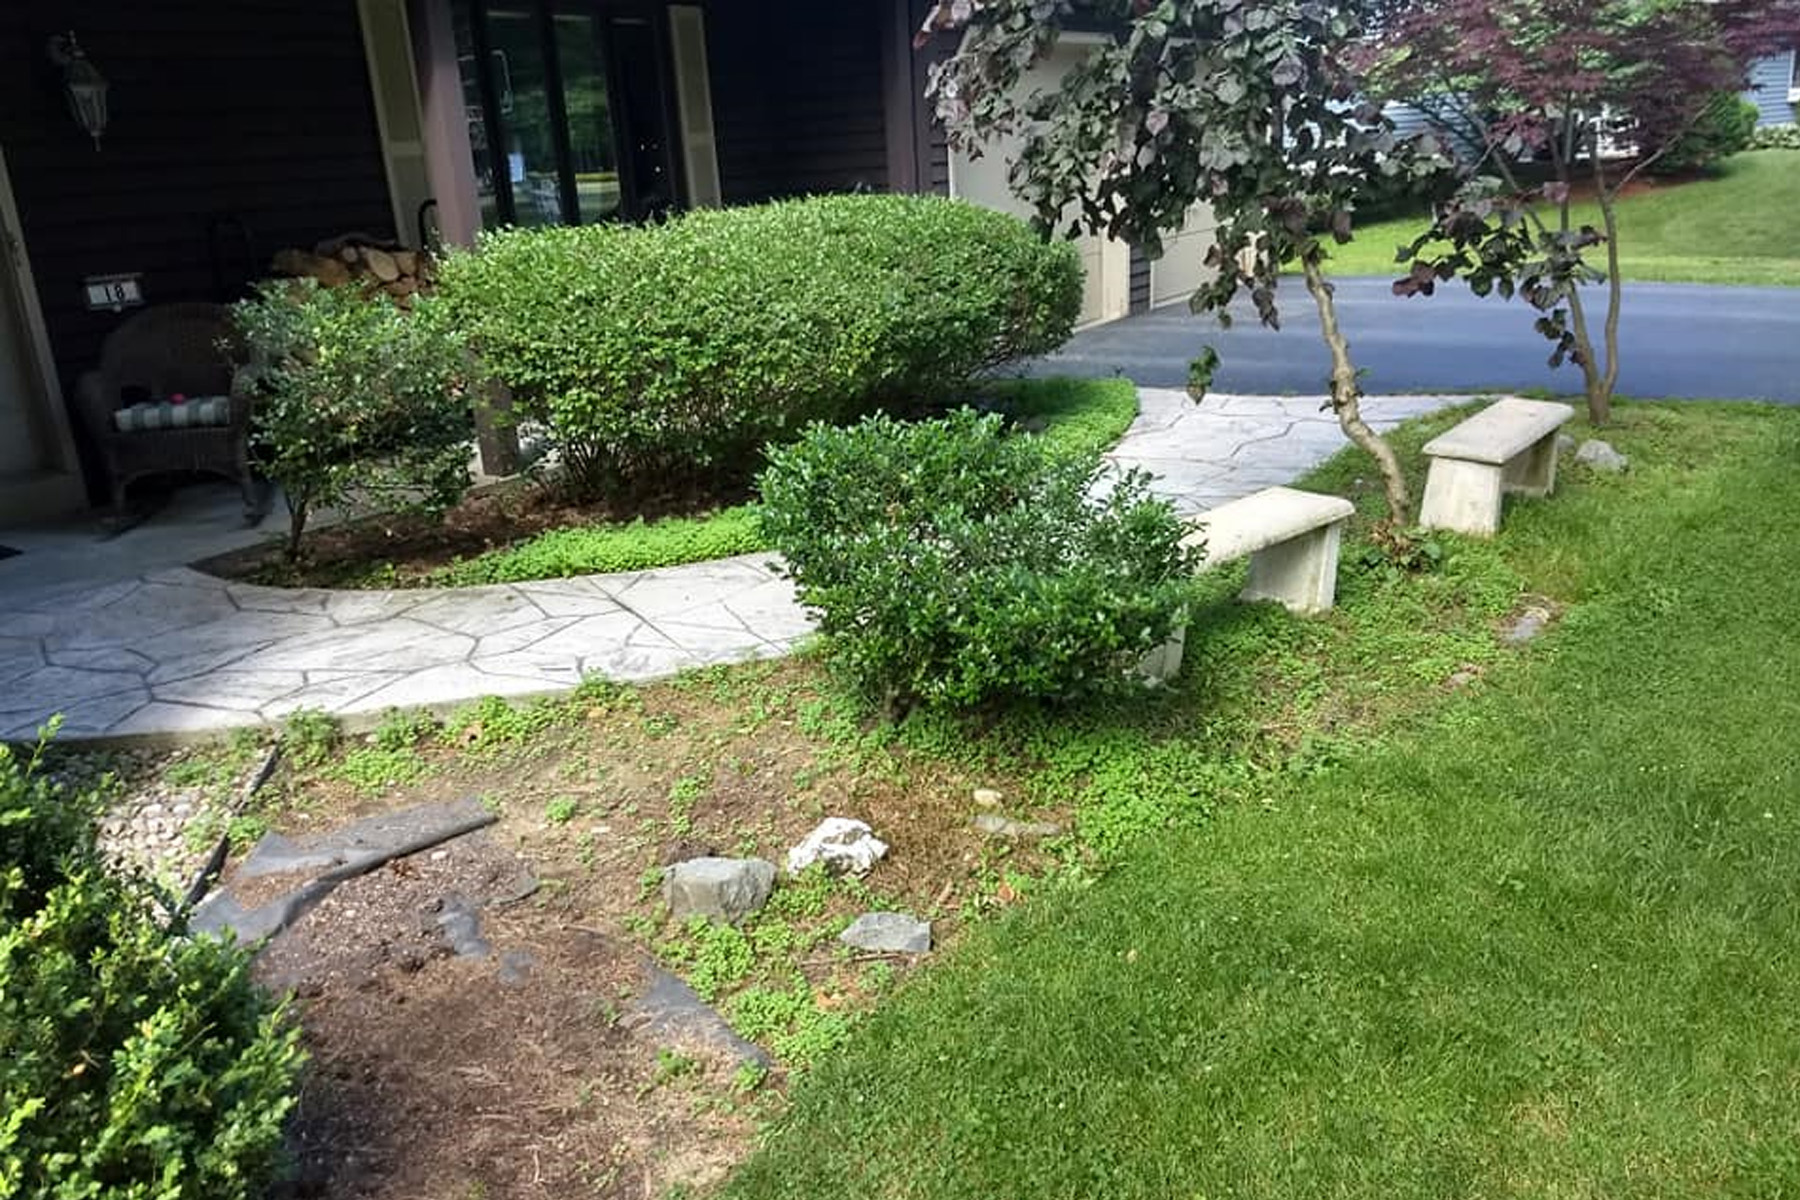 An overgrown plant bed and stone bench seating area in front of the house (bed)